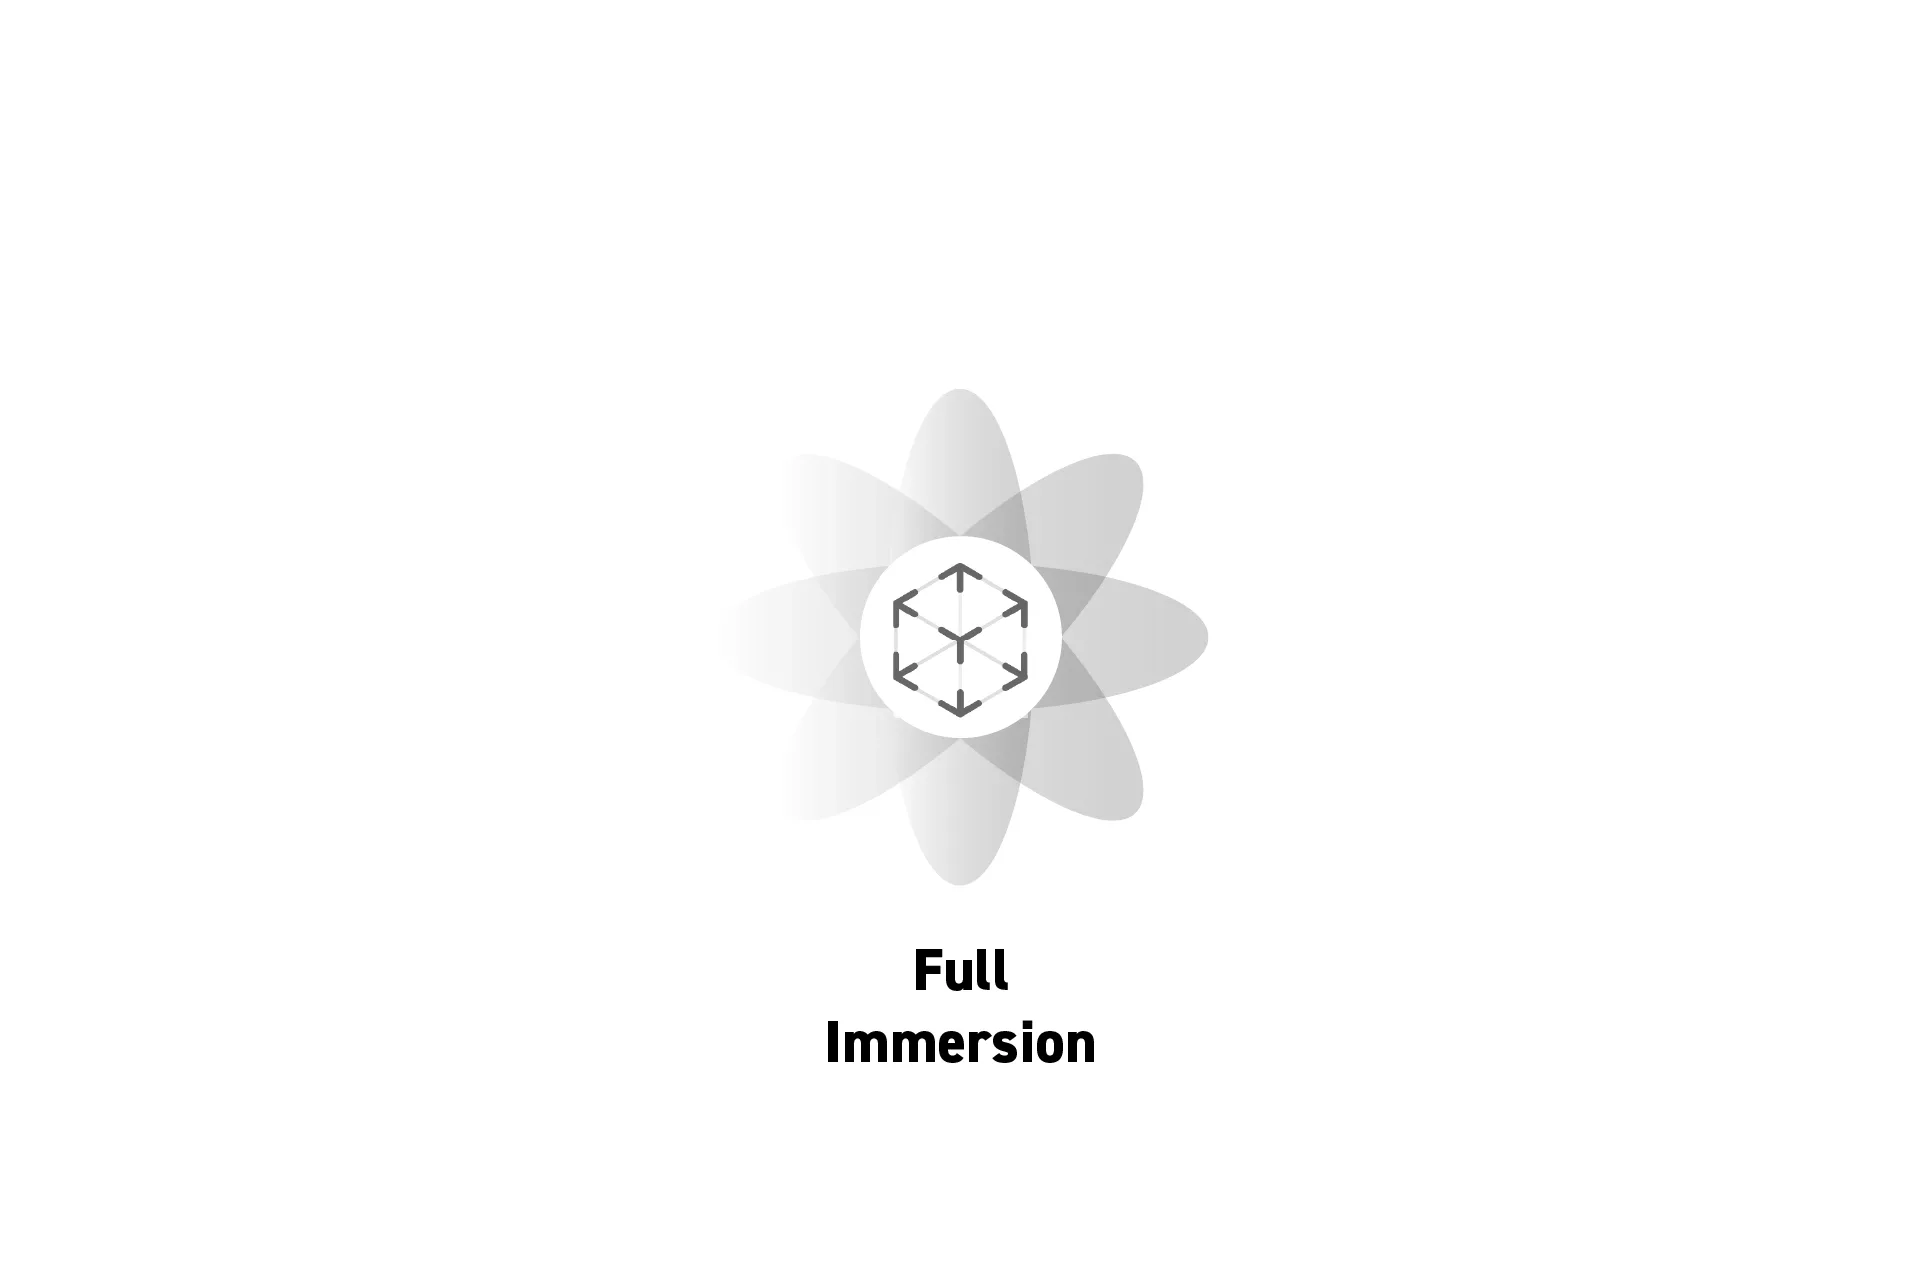 A flower that represents spatial computing with the text "Full Immersion" beneath it.